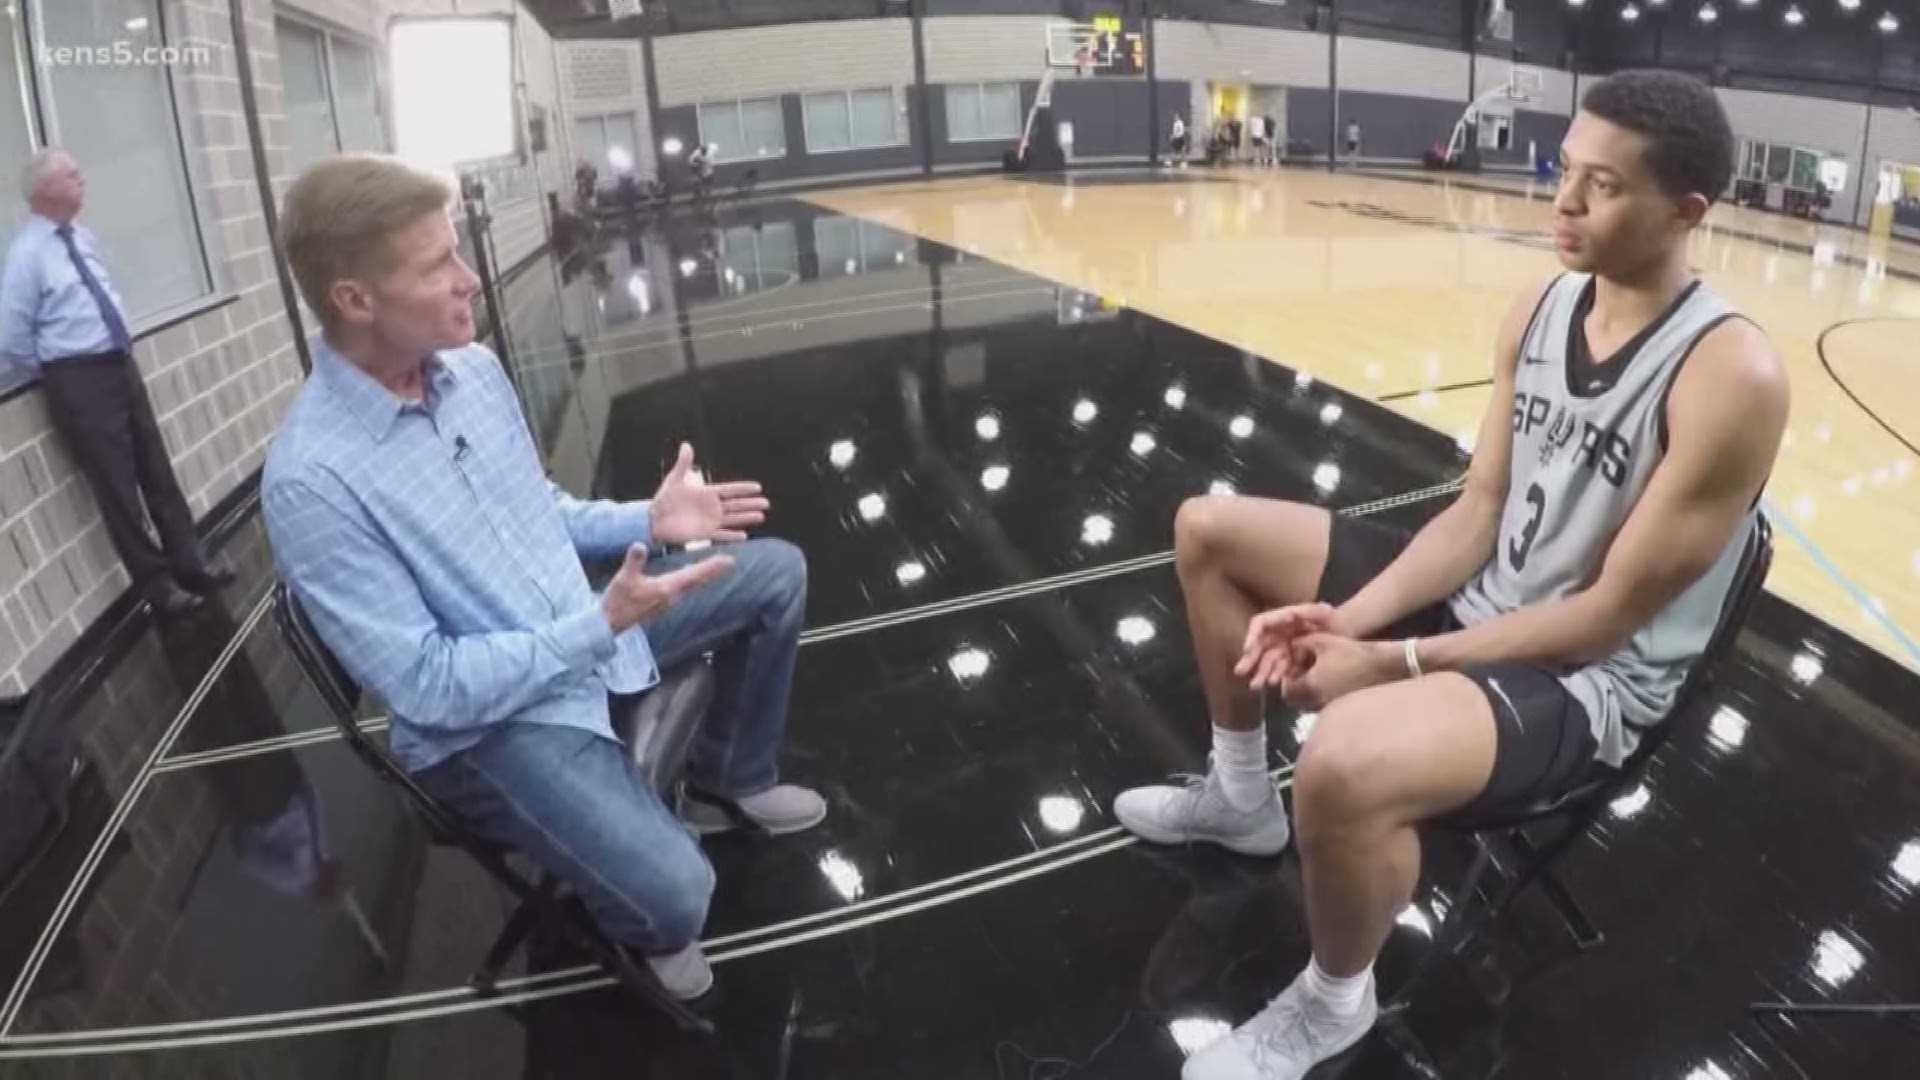 KENS 5's Joe Reinagel sat down with Keldon Johnson, the Spurs' second player picked in the 2019 draft, about the important things in life...if he's had a San Antonio taco yet.